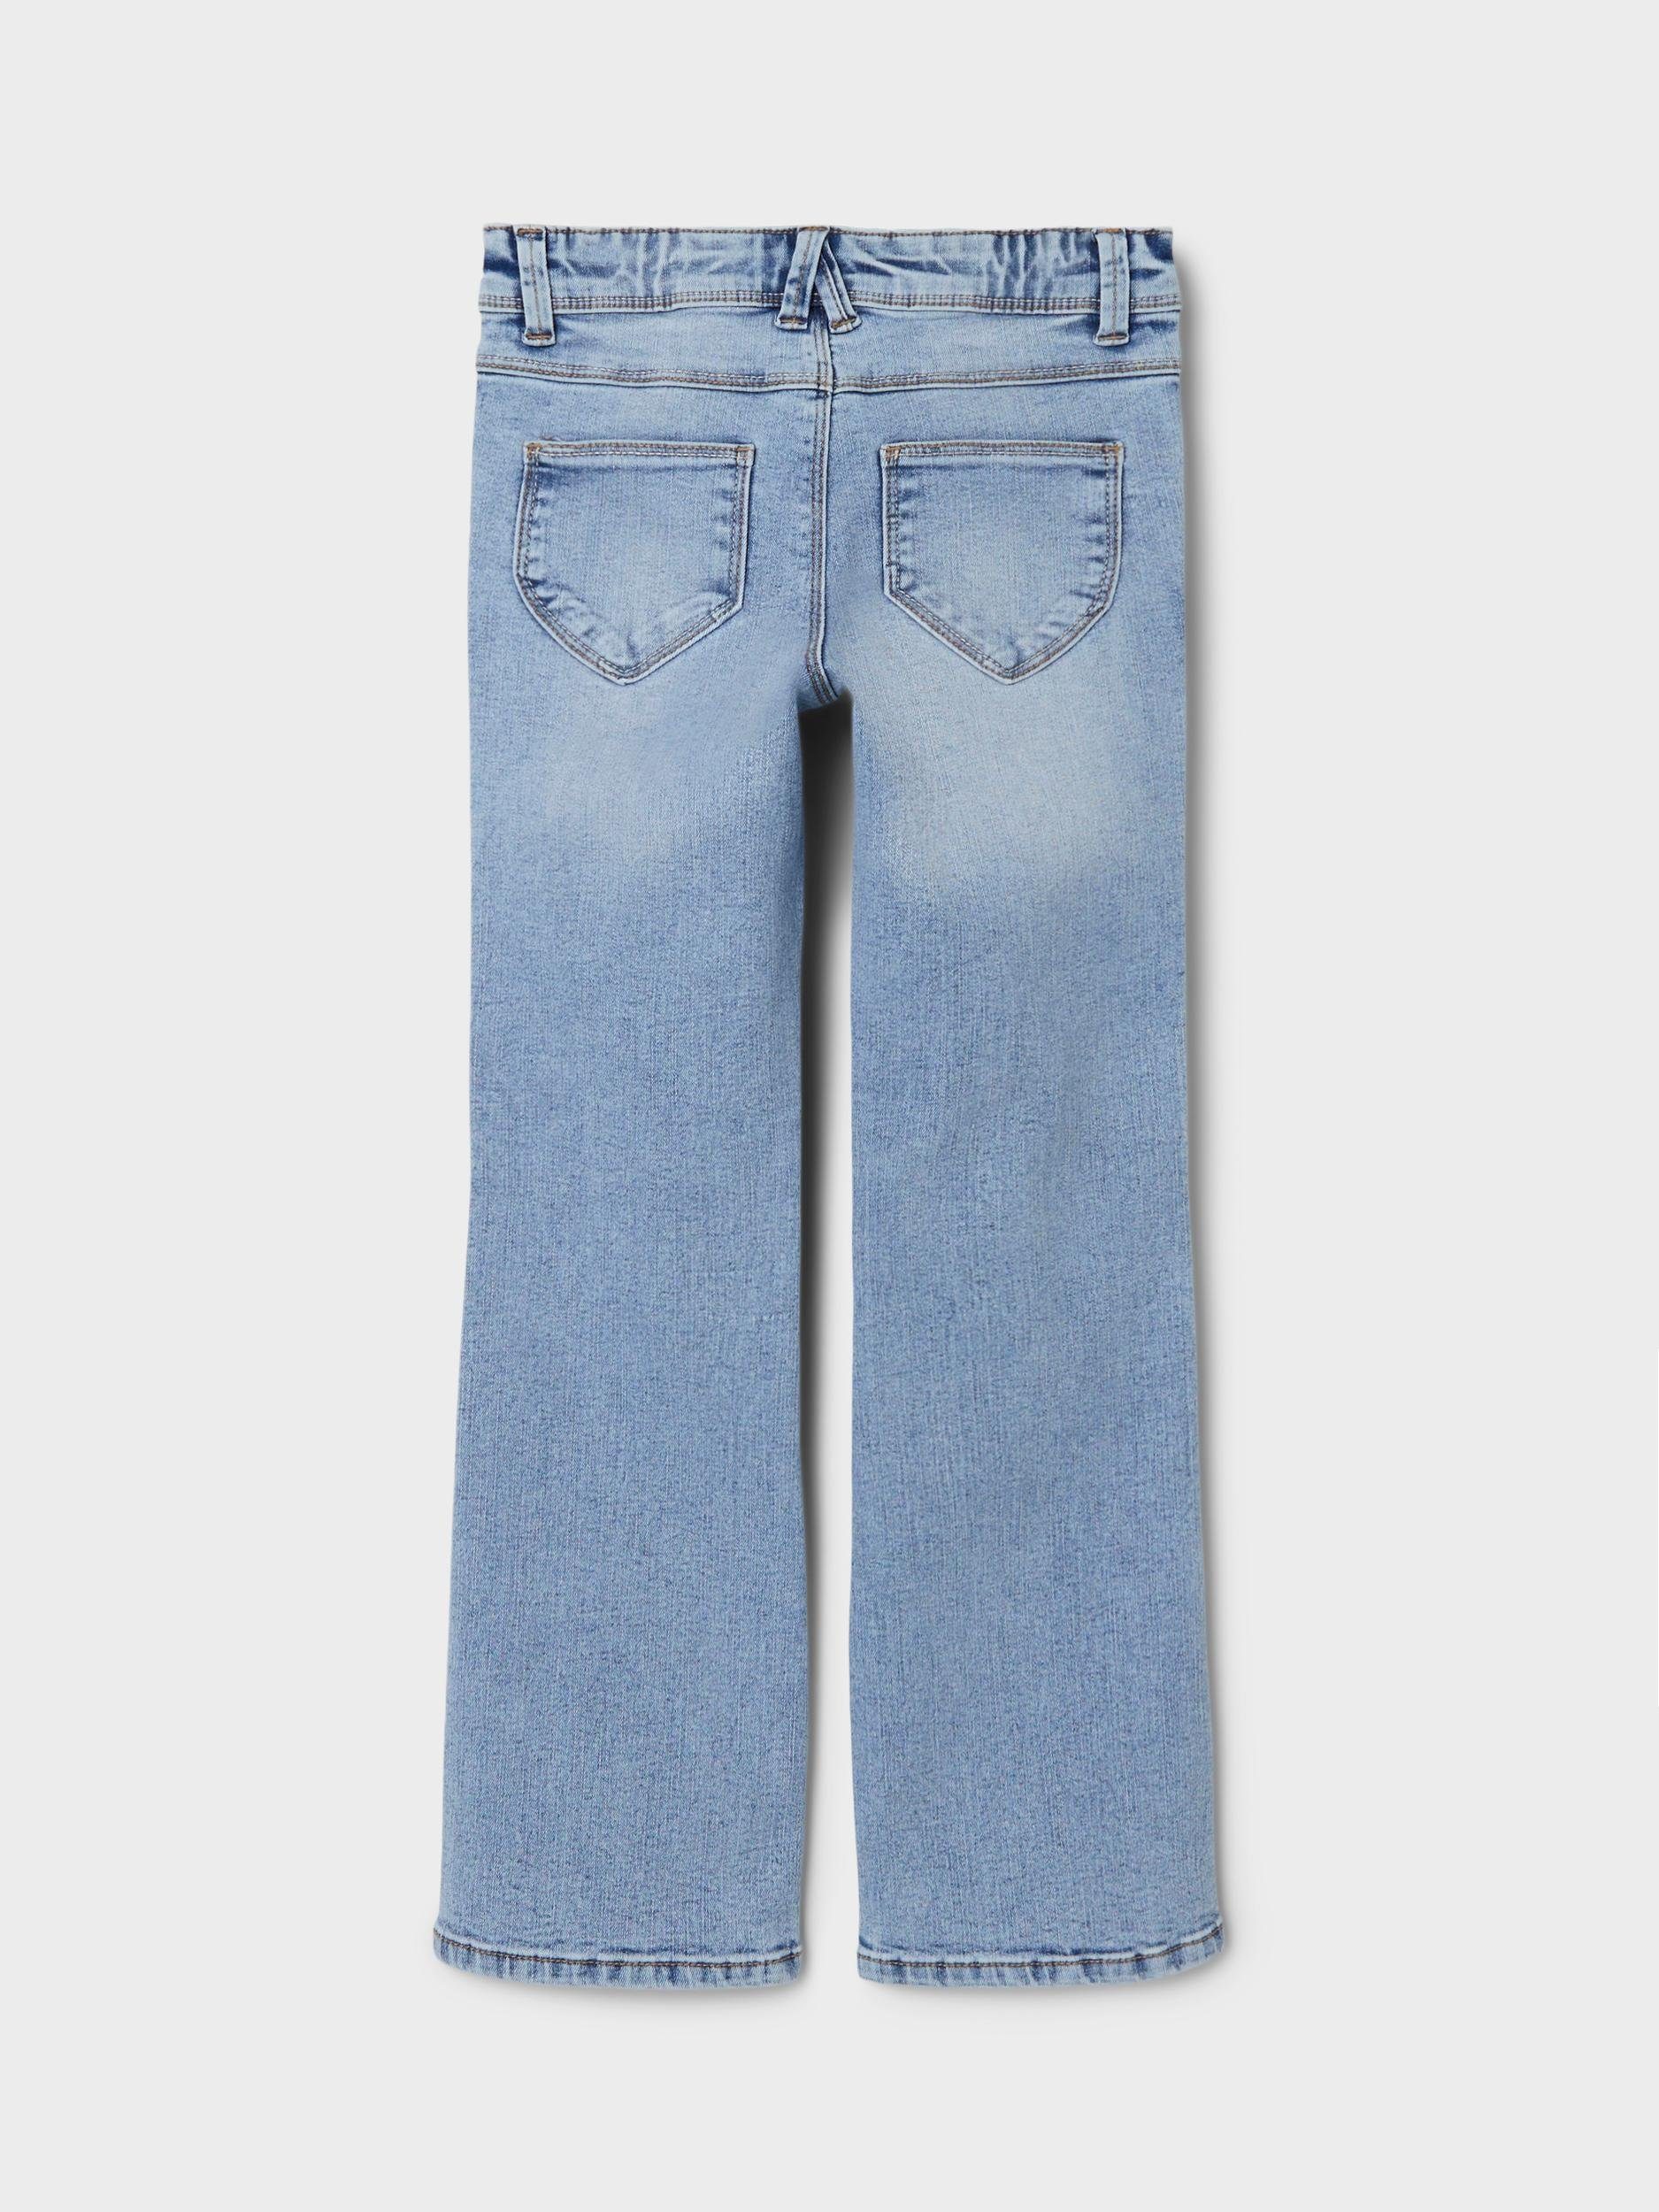 Blue It BOOT mit 1142-AU Bootcut-Jeans Name JEANS SKINNY NOOS NKFPOLLY Light Denim Stretch